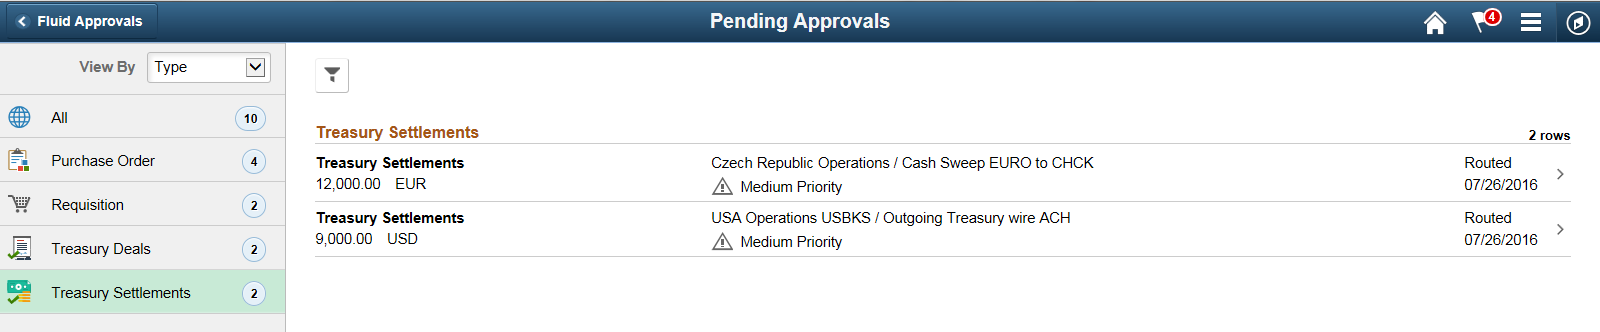 Treasury Settlements - Pending Approvals page (LFF)